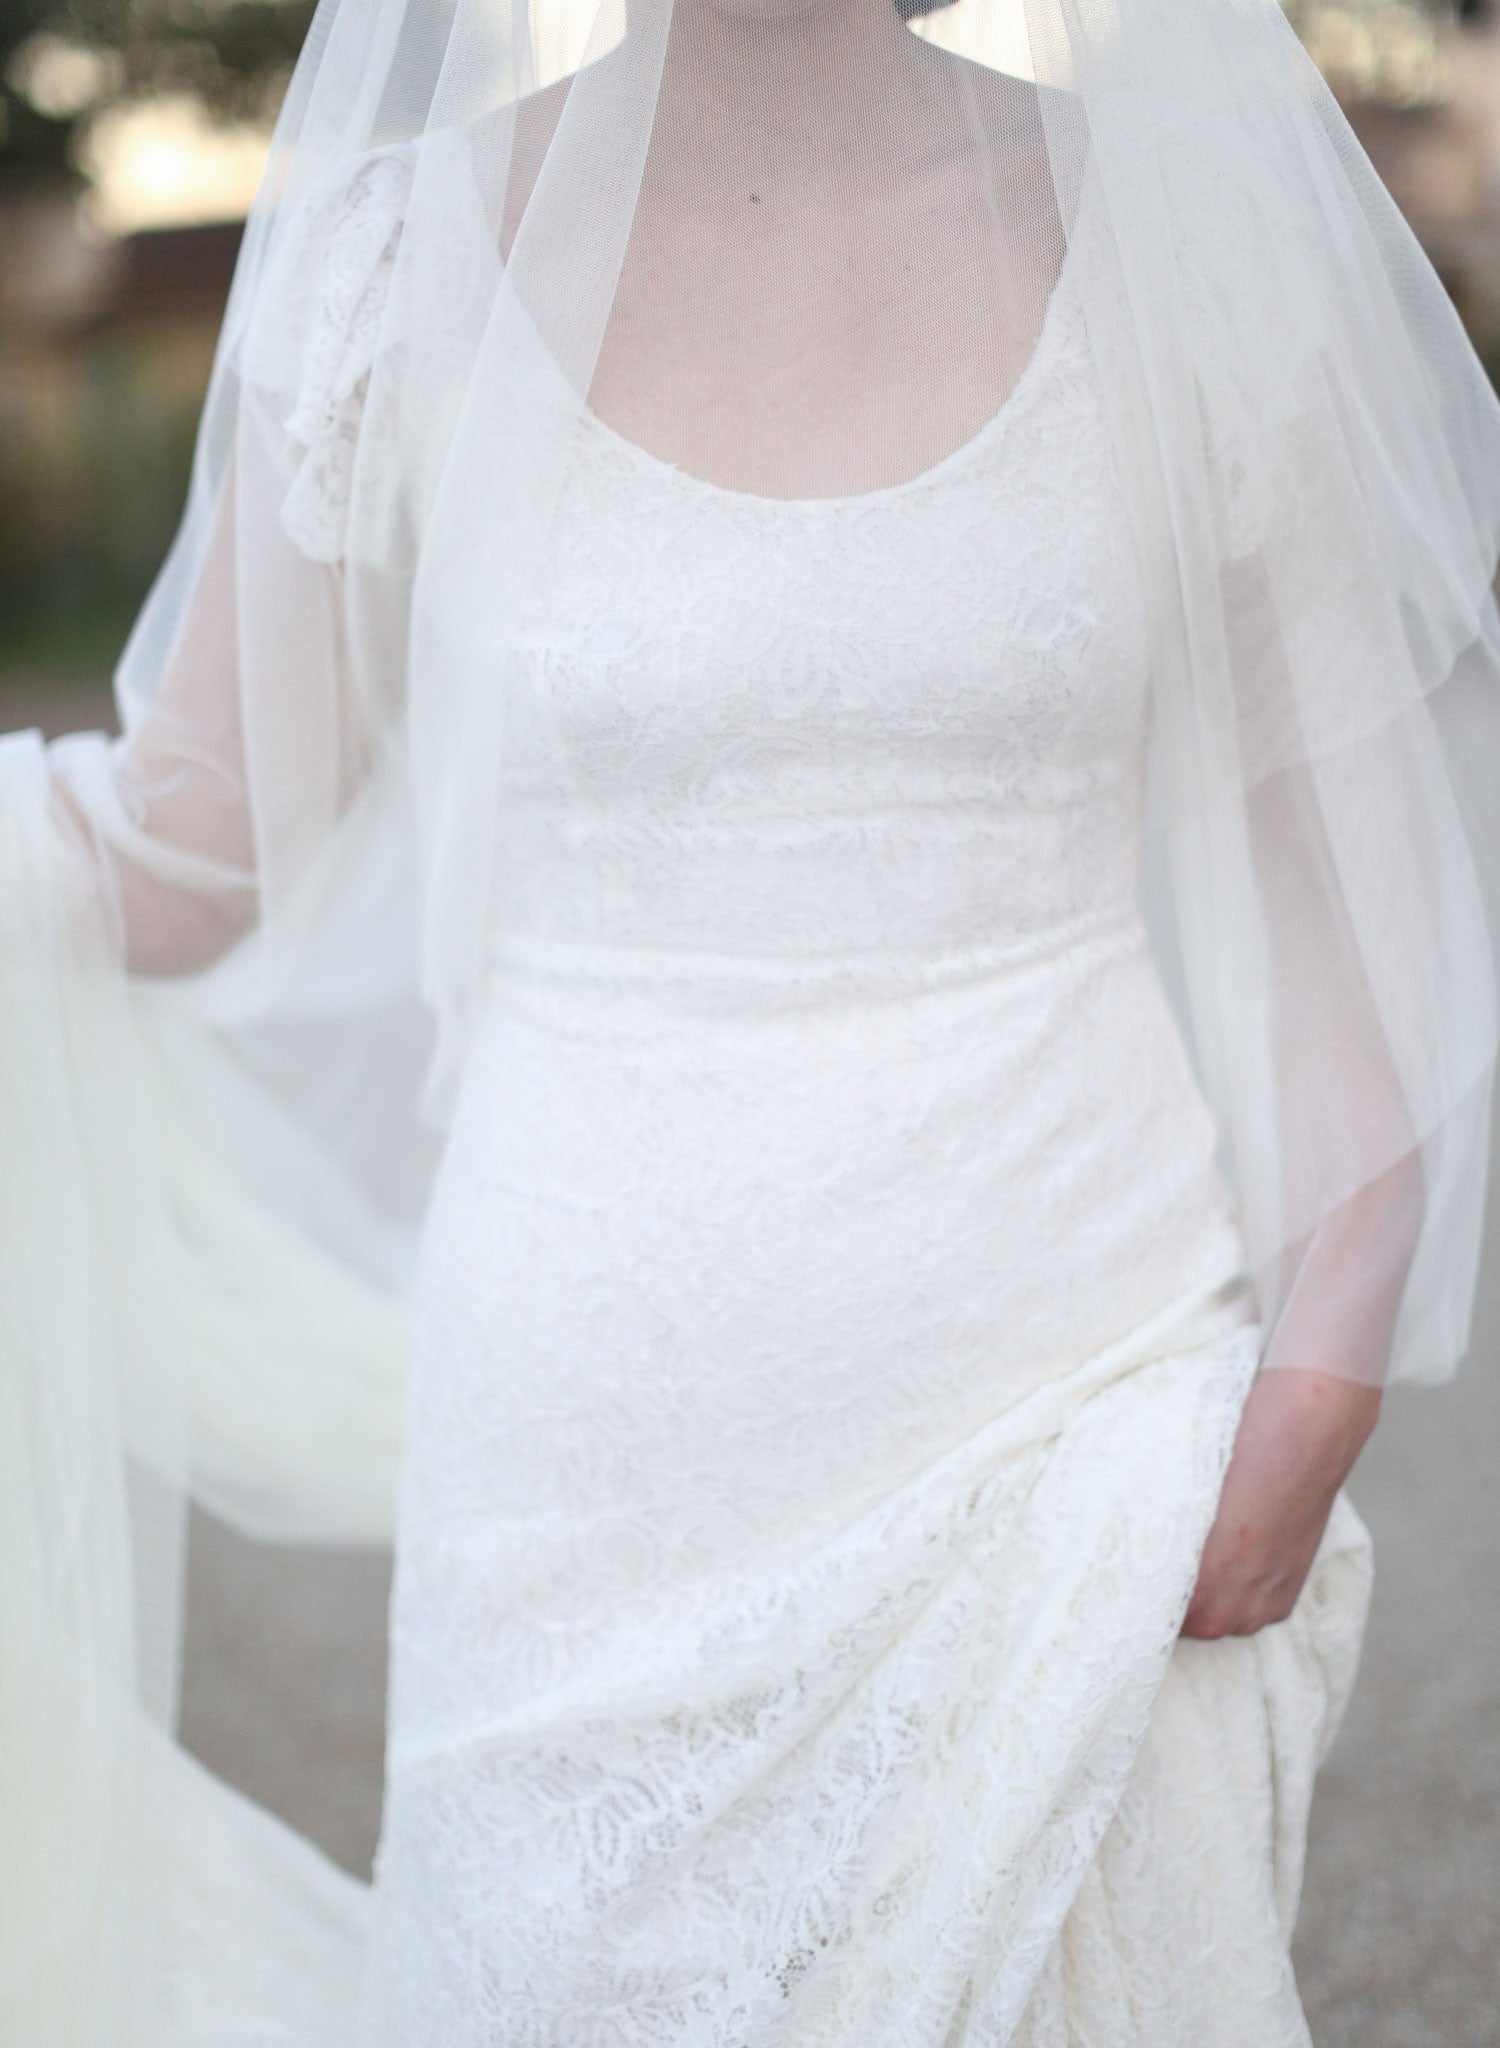 Twigs & Honey Mini Tulle Veil - Style #218 Ivory (As Pictured)